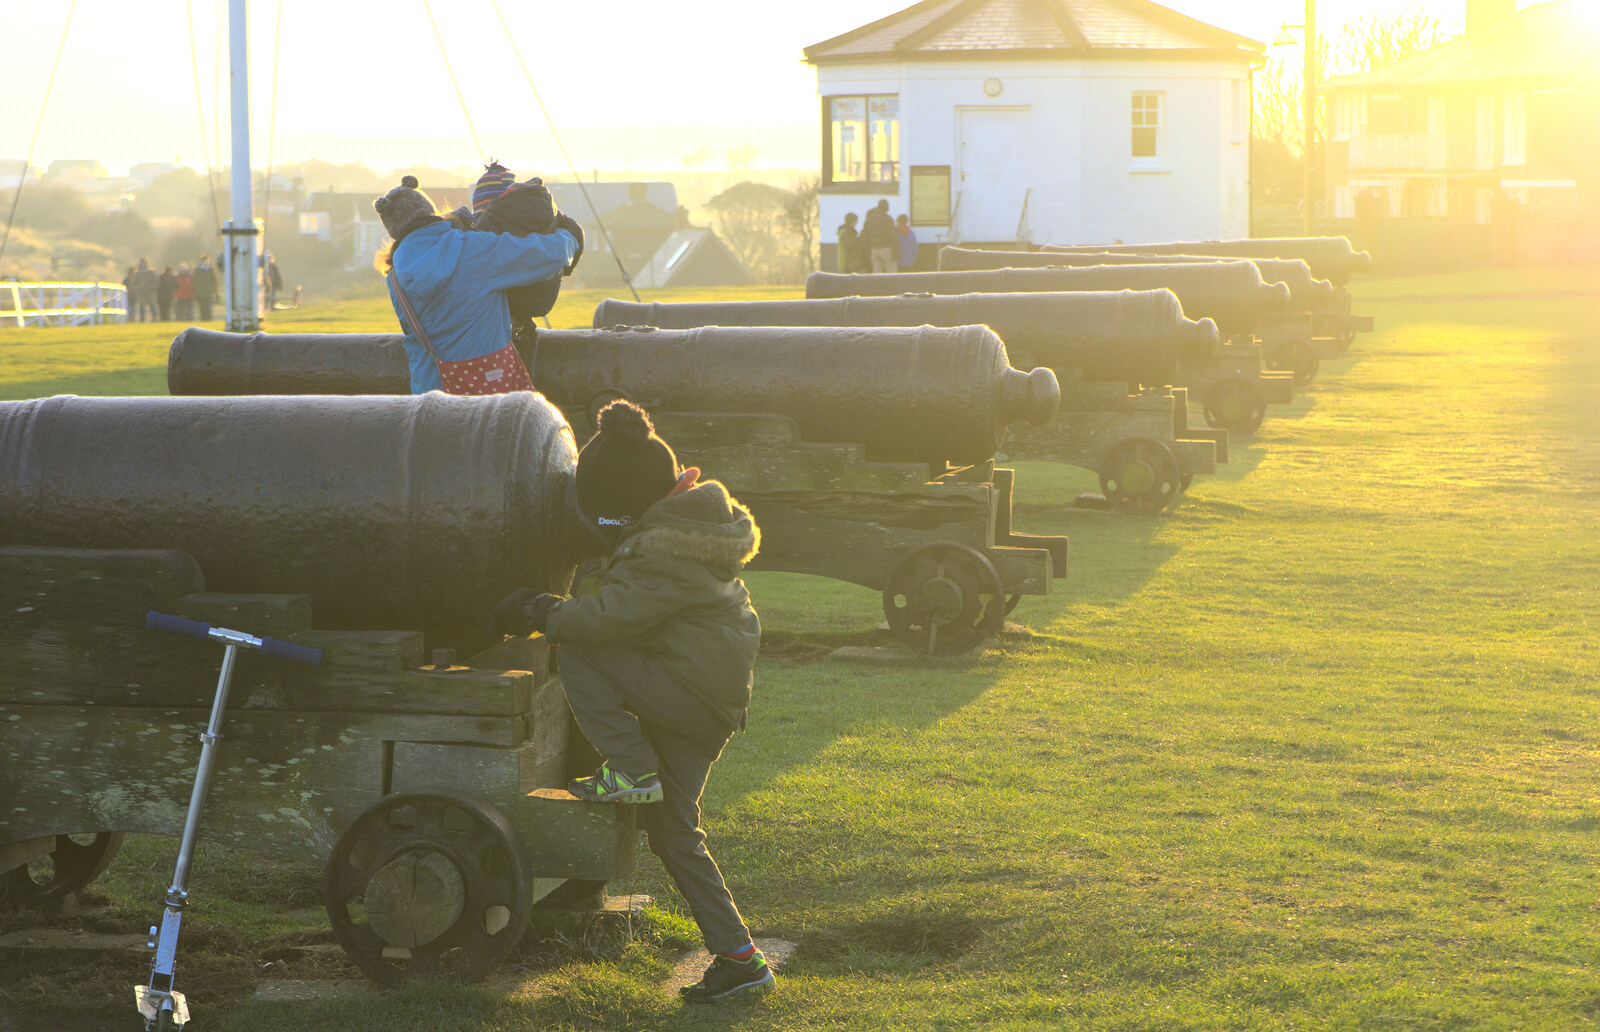 Fred climbs on a cannon from Sunset on the Beach, Southwold, Suffolk - 30th December 2014